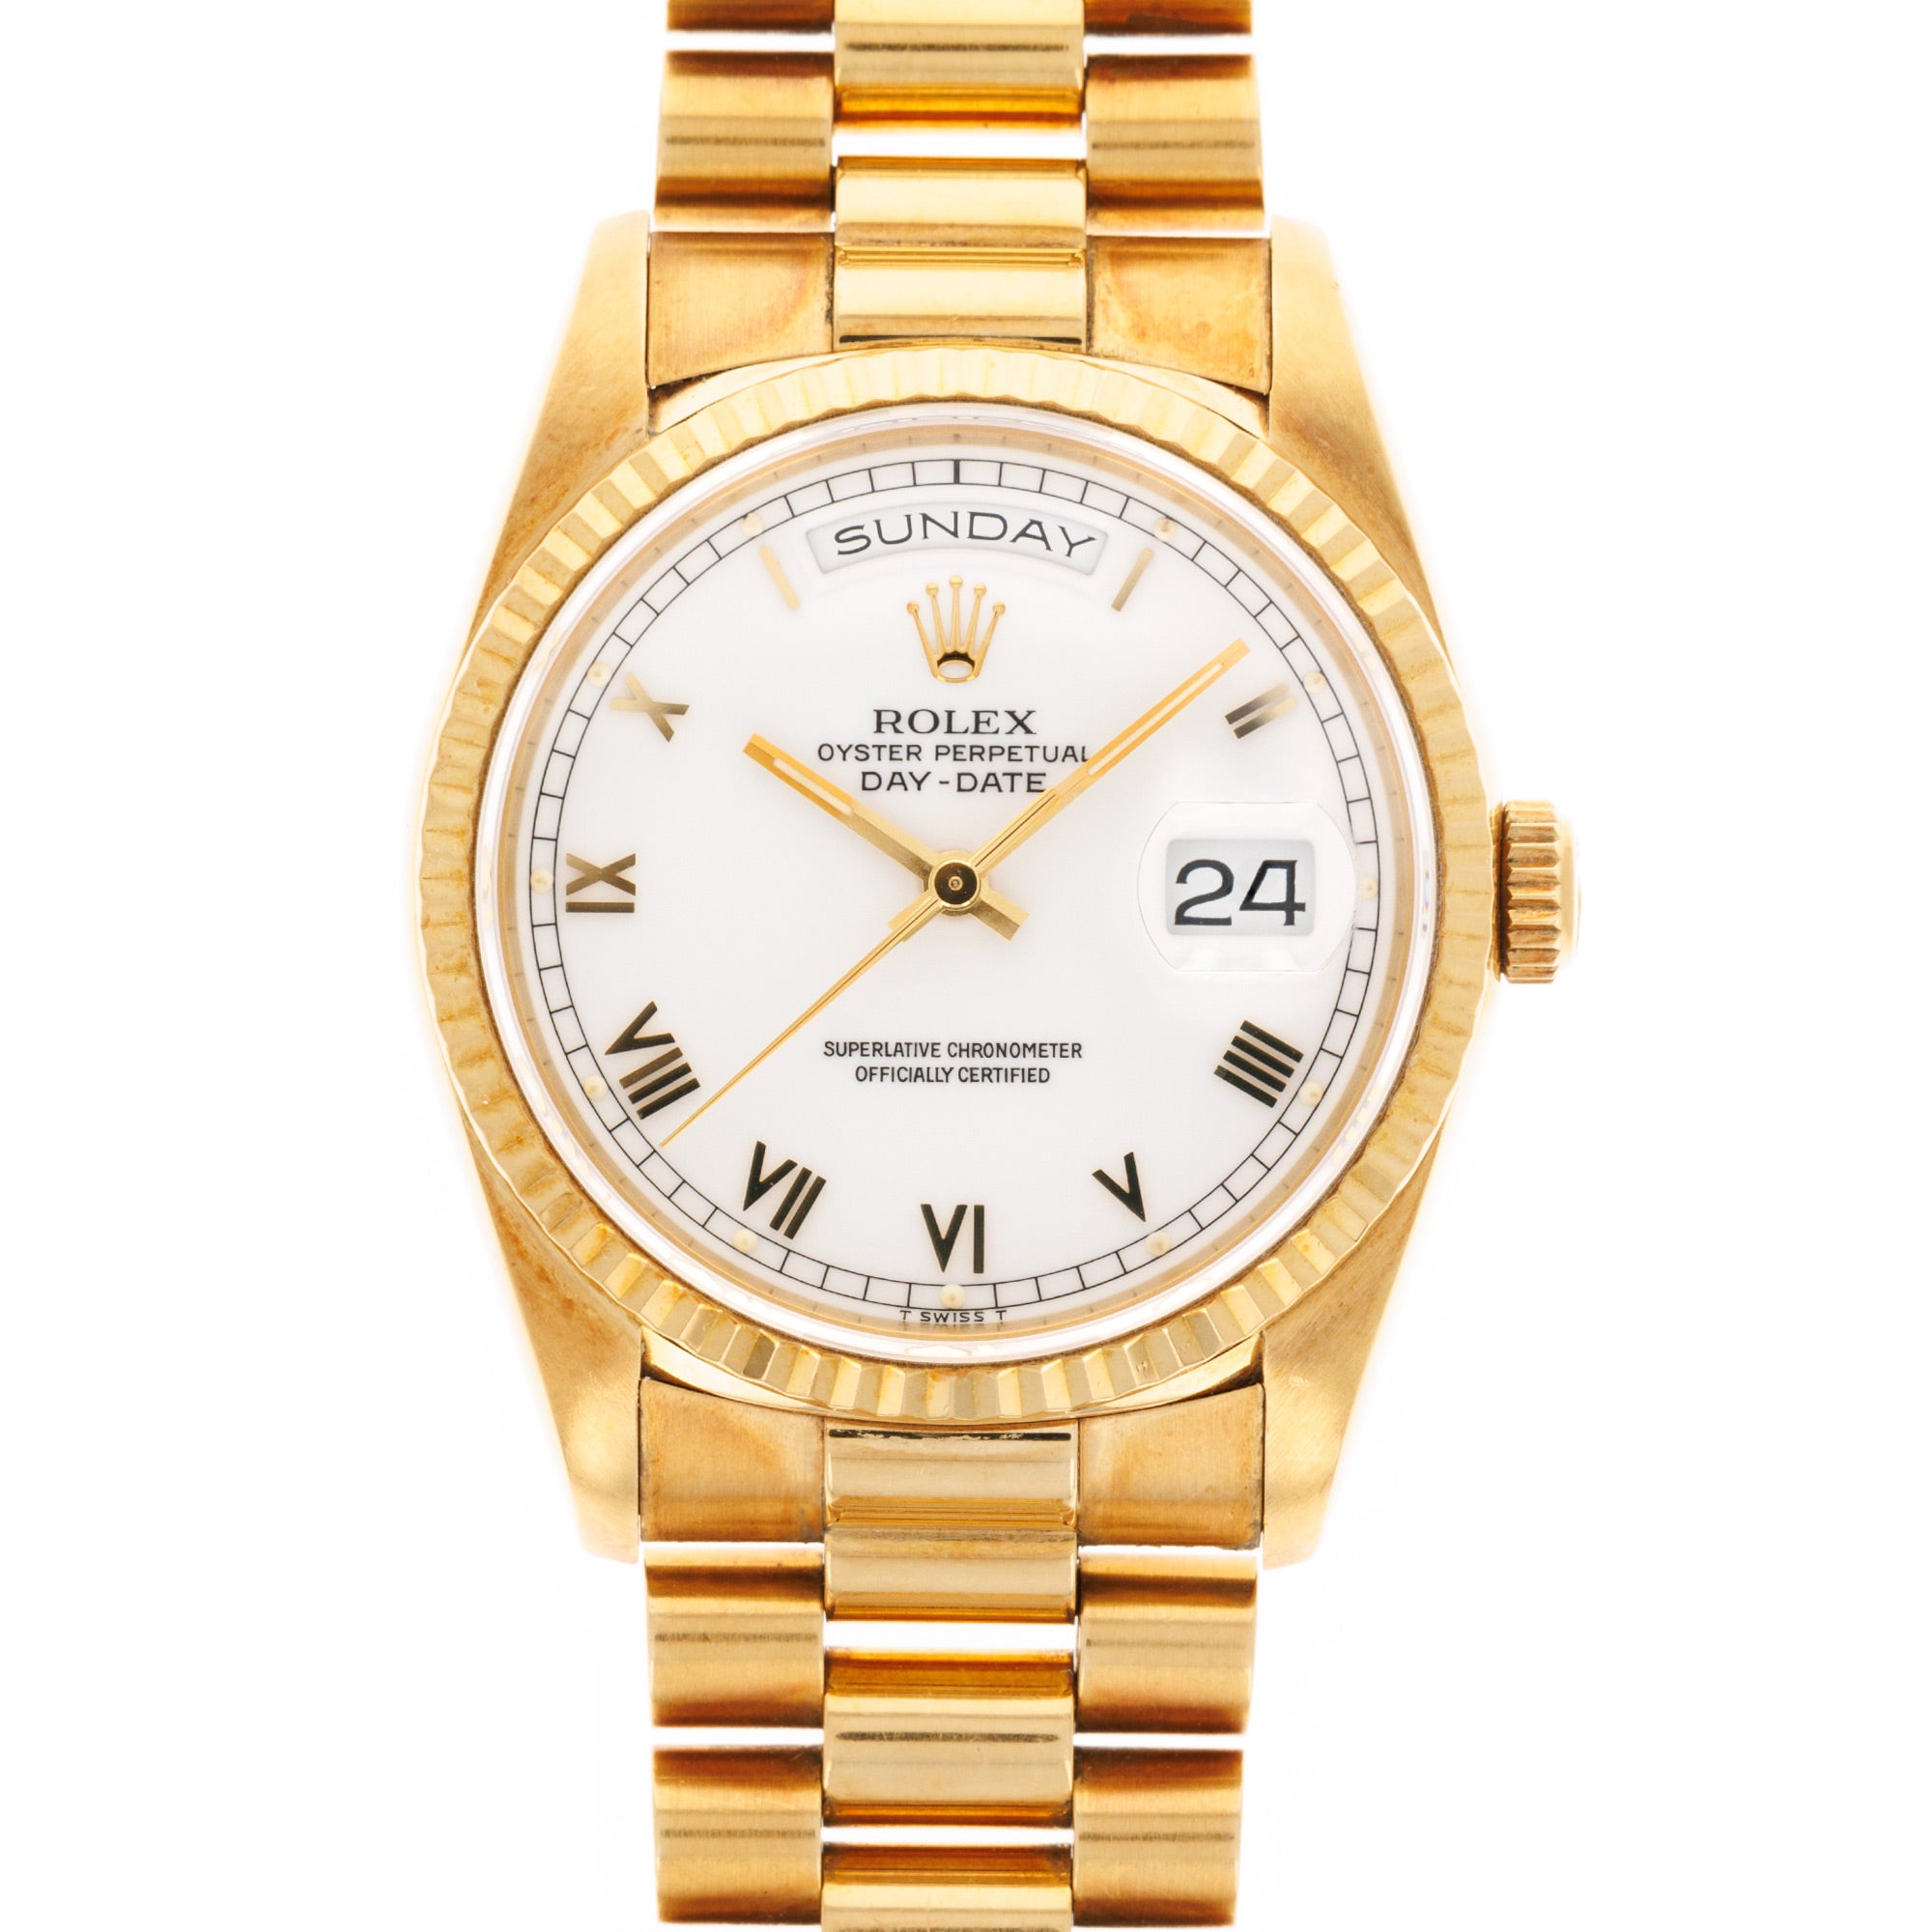 Rolex - Rolex Yellow Gold Day-Date Ref. 18238 with White Roman Dial - The Keystone Watches